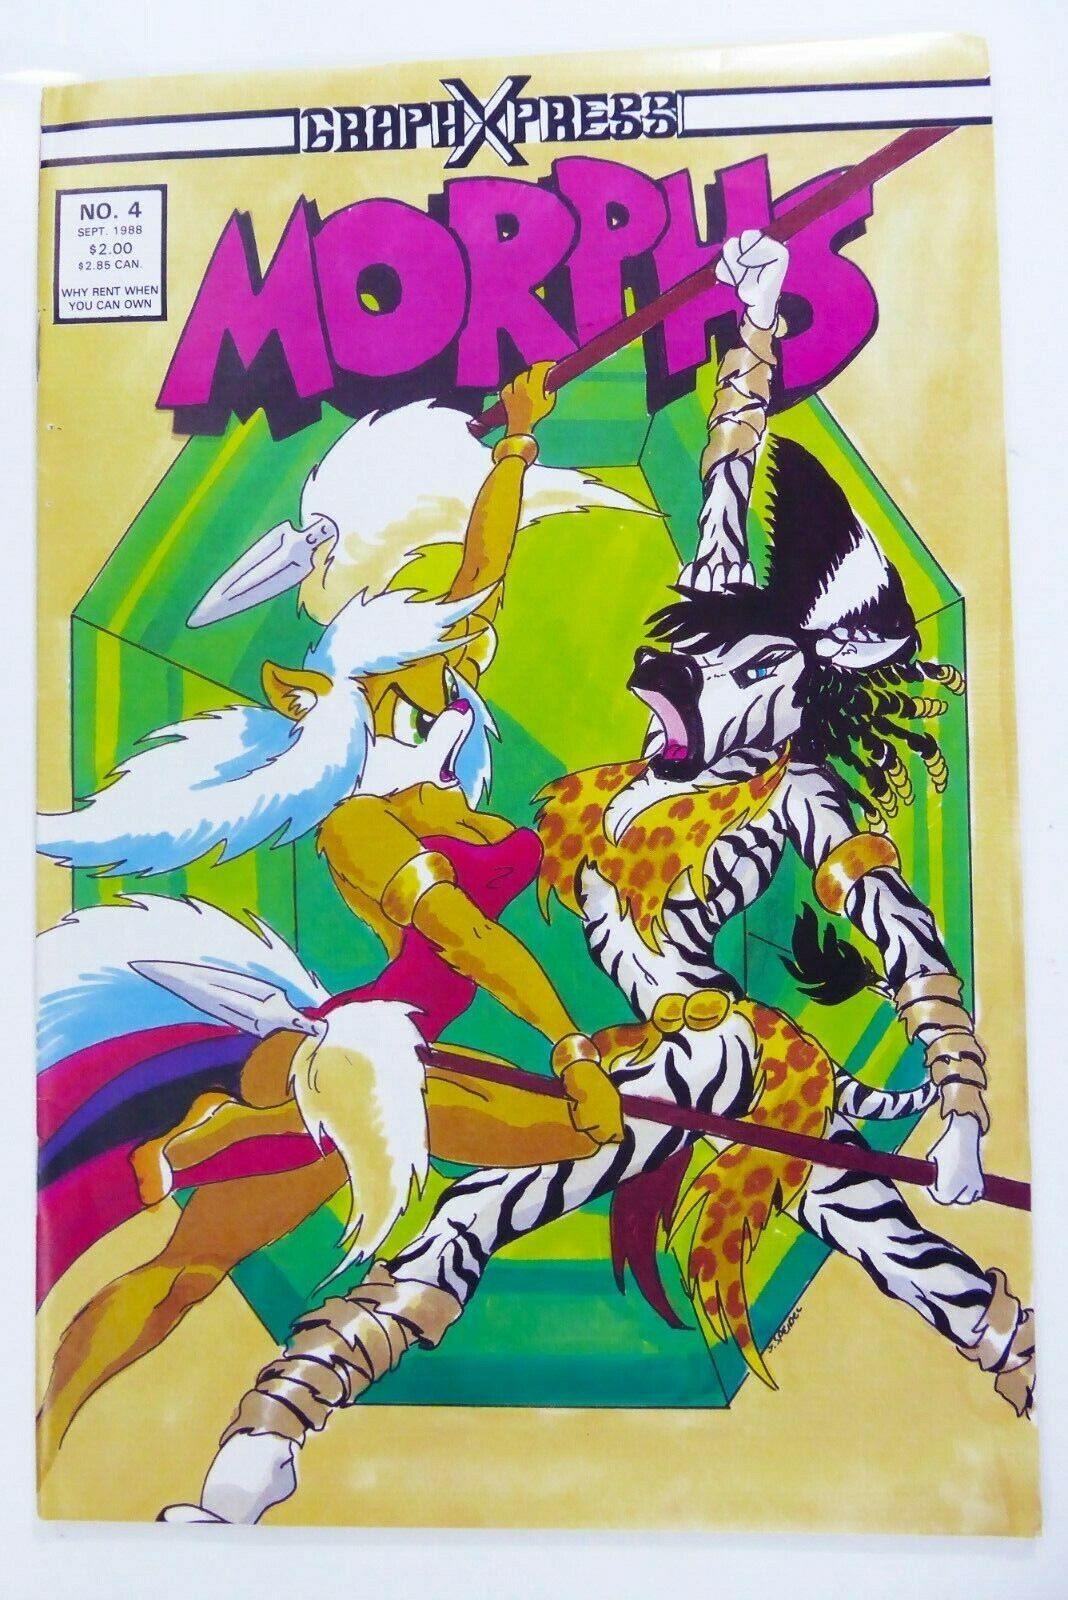 GraphX Press MORPHS (1987) #4 Anthropomorphic FURRY Cover VF Ships FREE